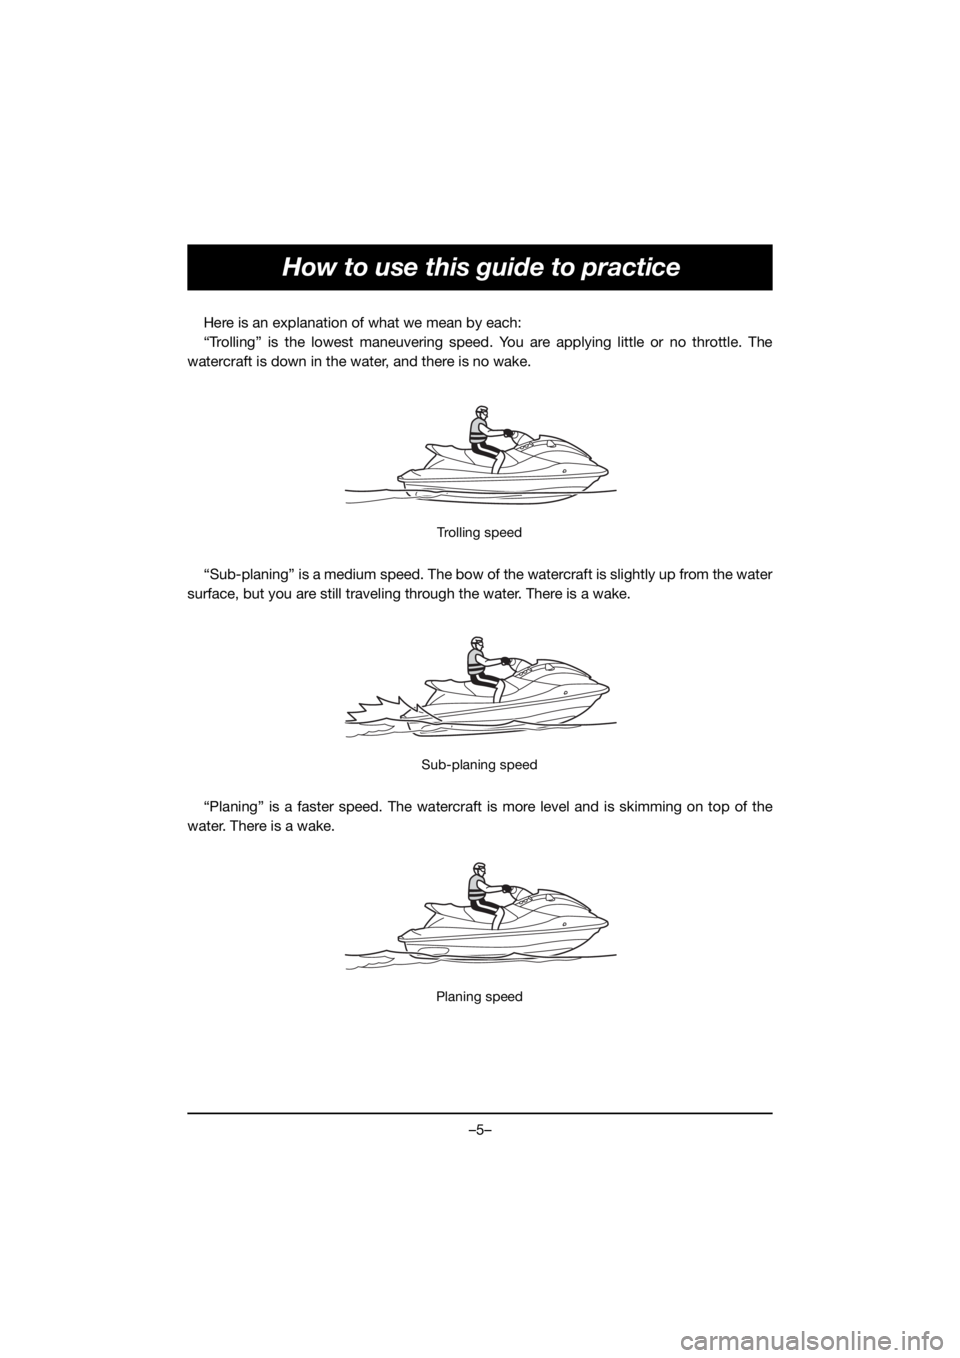 YAMAHA VX CRUISER HO 2021  Manuale duso (in Italian) –5–
How to use this guide to practice
Here is an explanation of what we mean by each:
“Trolling” is the lowest maneuvering speed. You are applying little or no throttle. The
watercraft is down